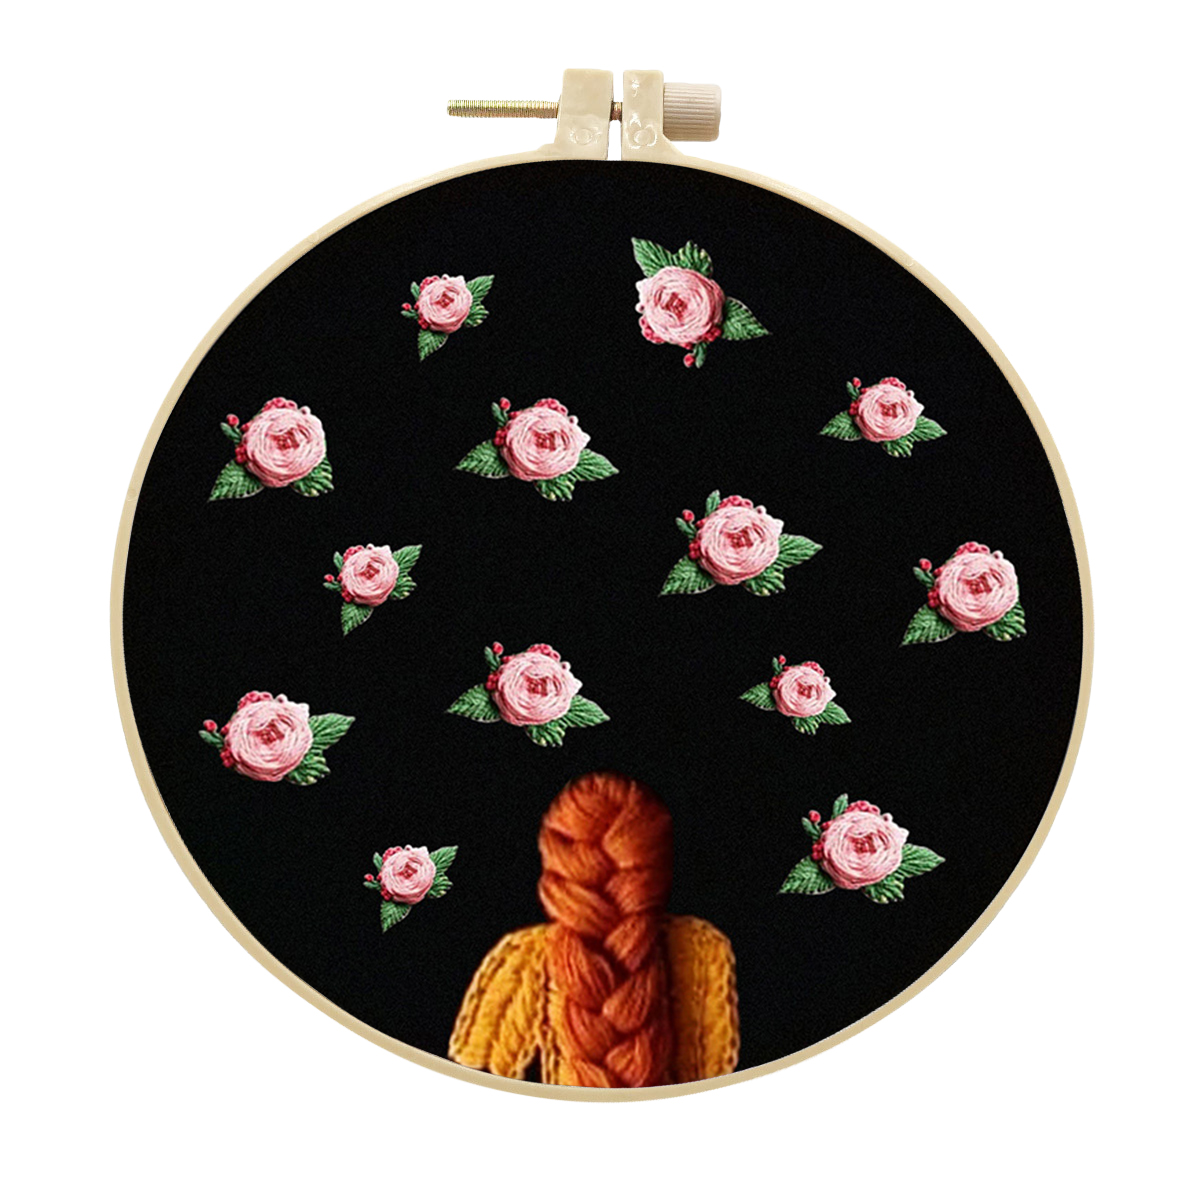 Handmade Embroidery Kit Cross stitch kit for Adult Beginner - Girl and Peach Blossom Pattern